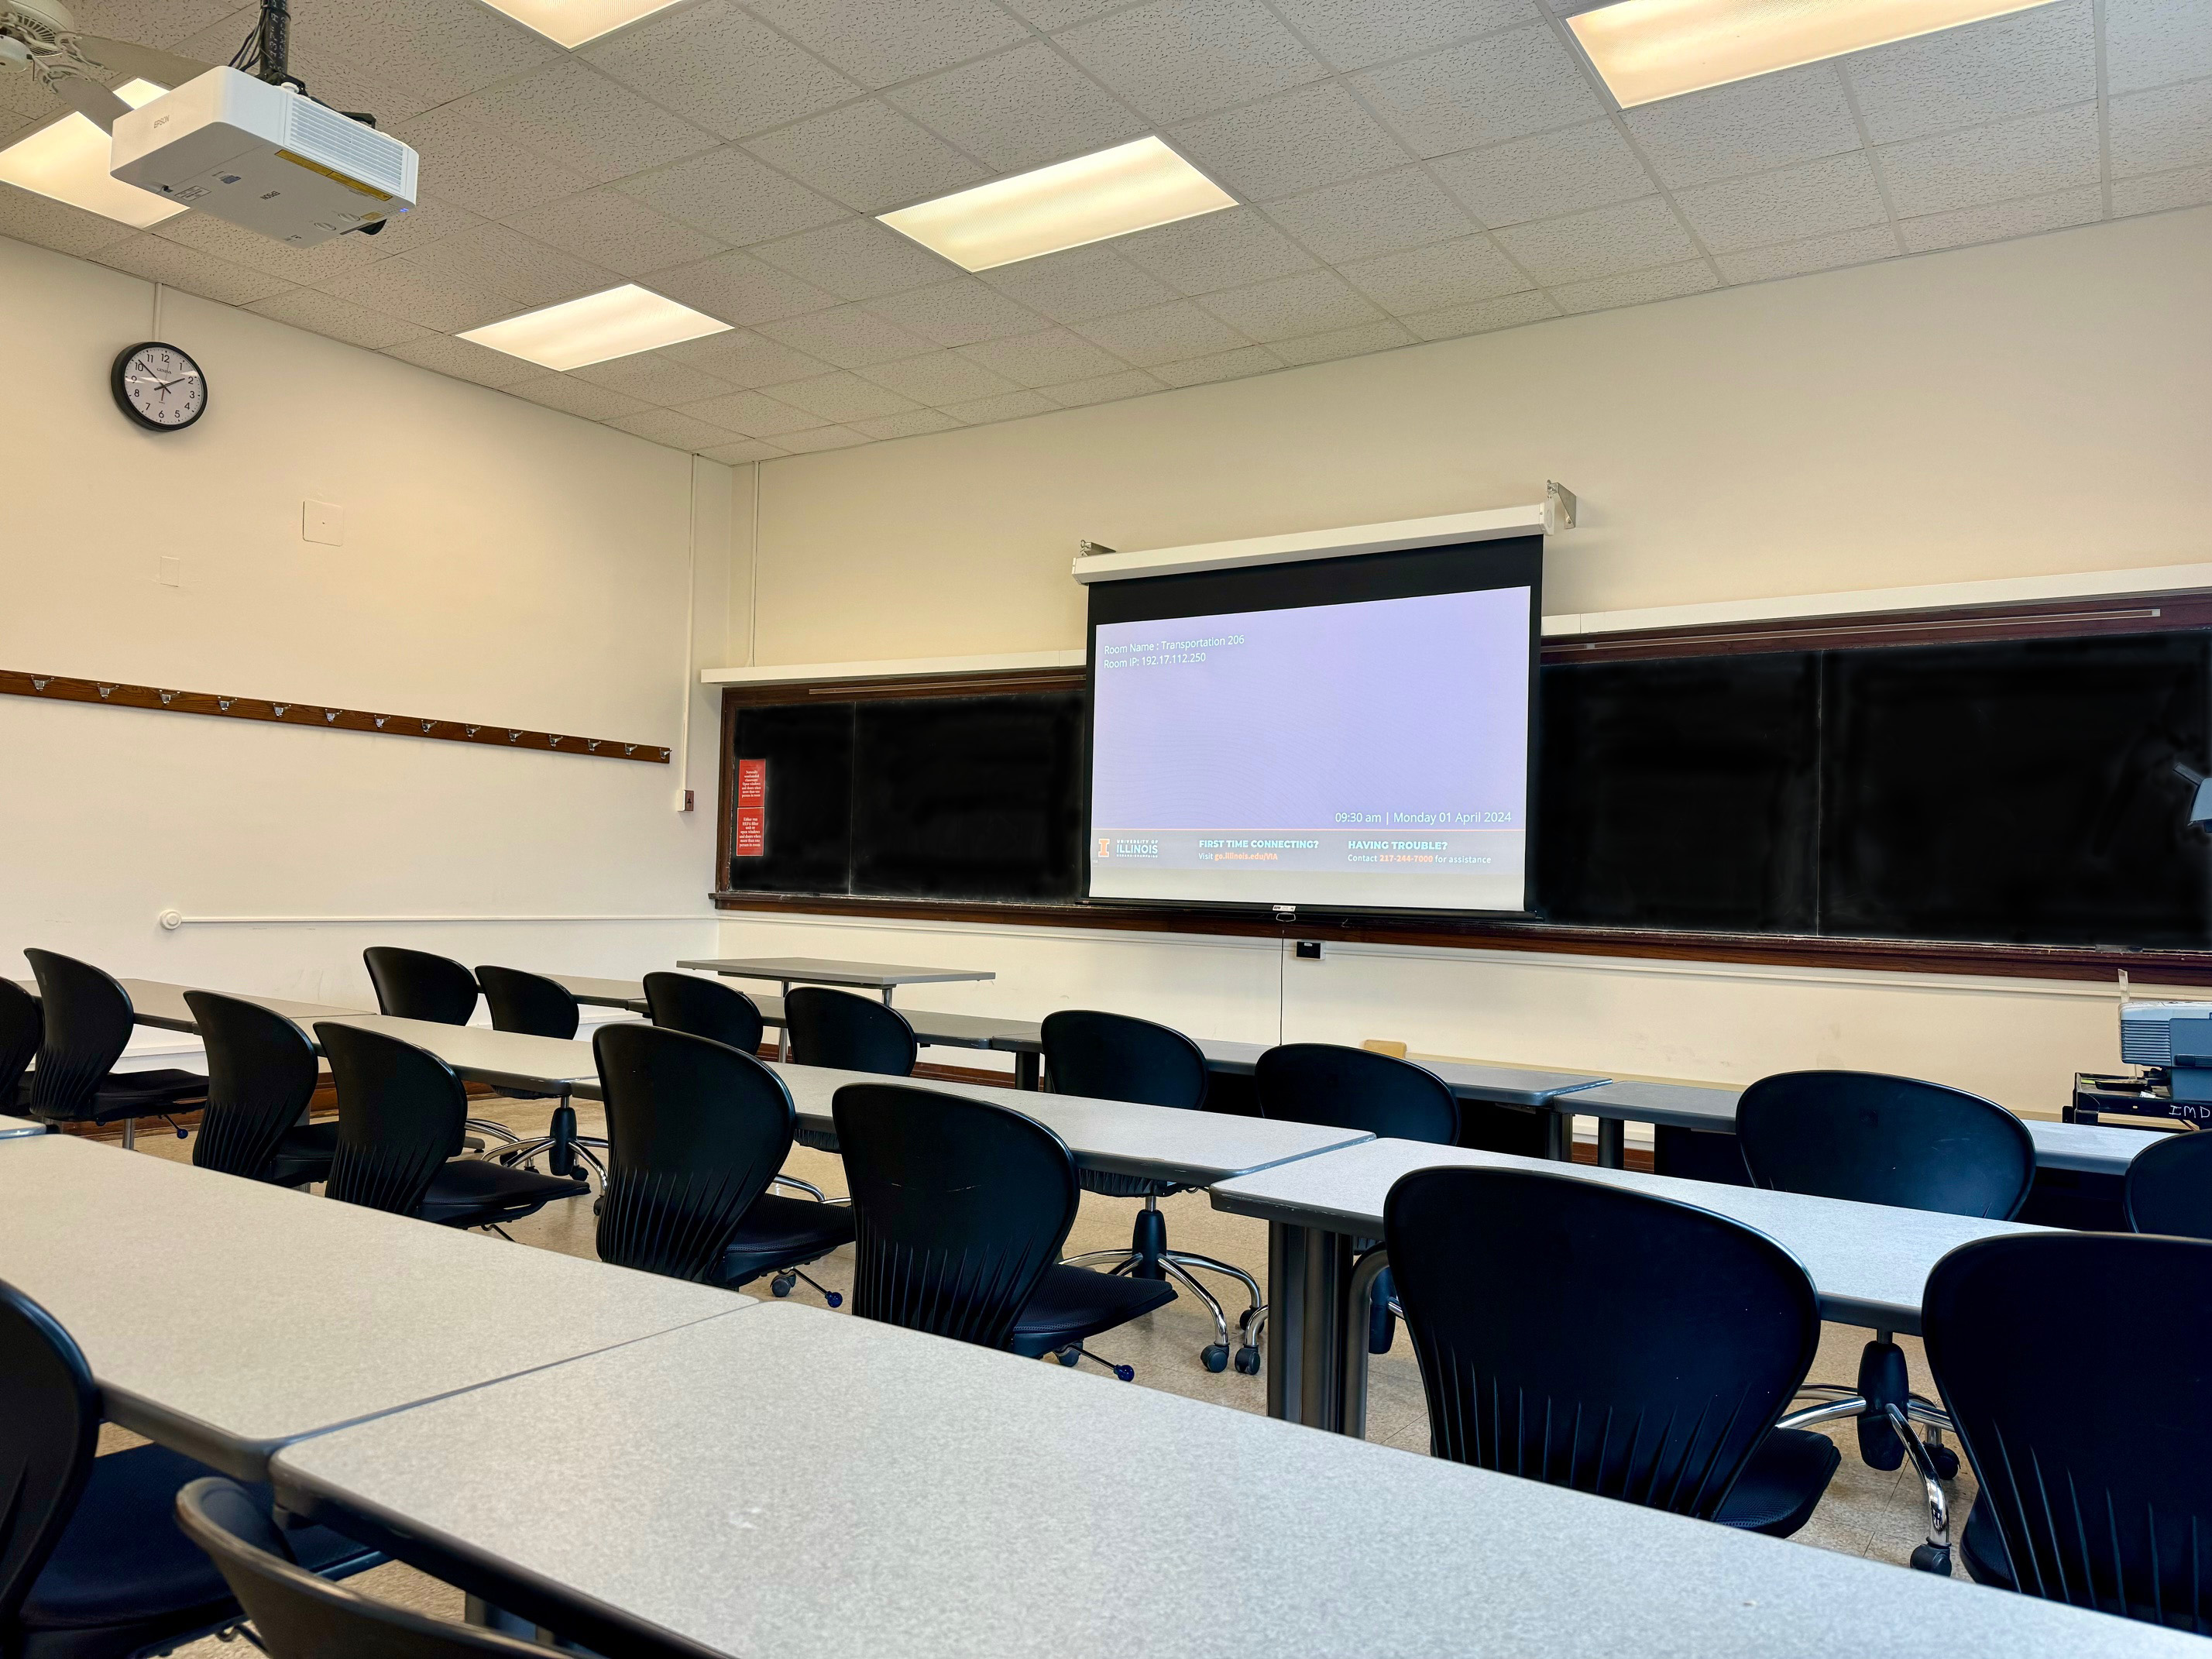 A view of the classroom with student desks, a front lecture table, and chalkboard.